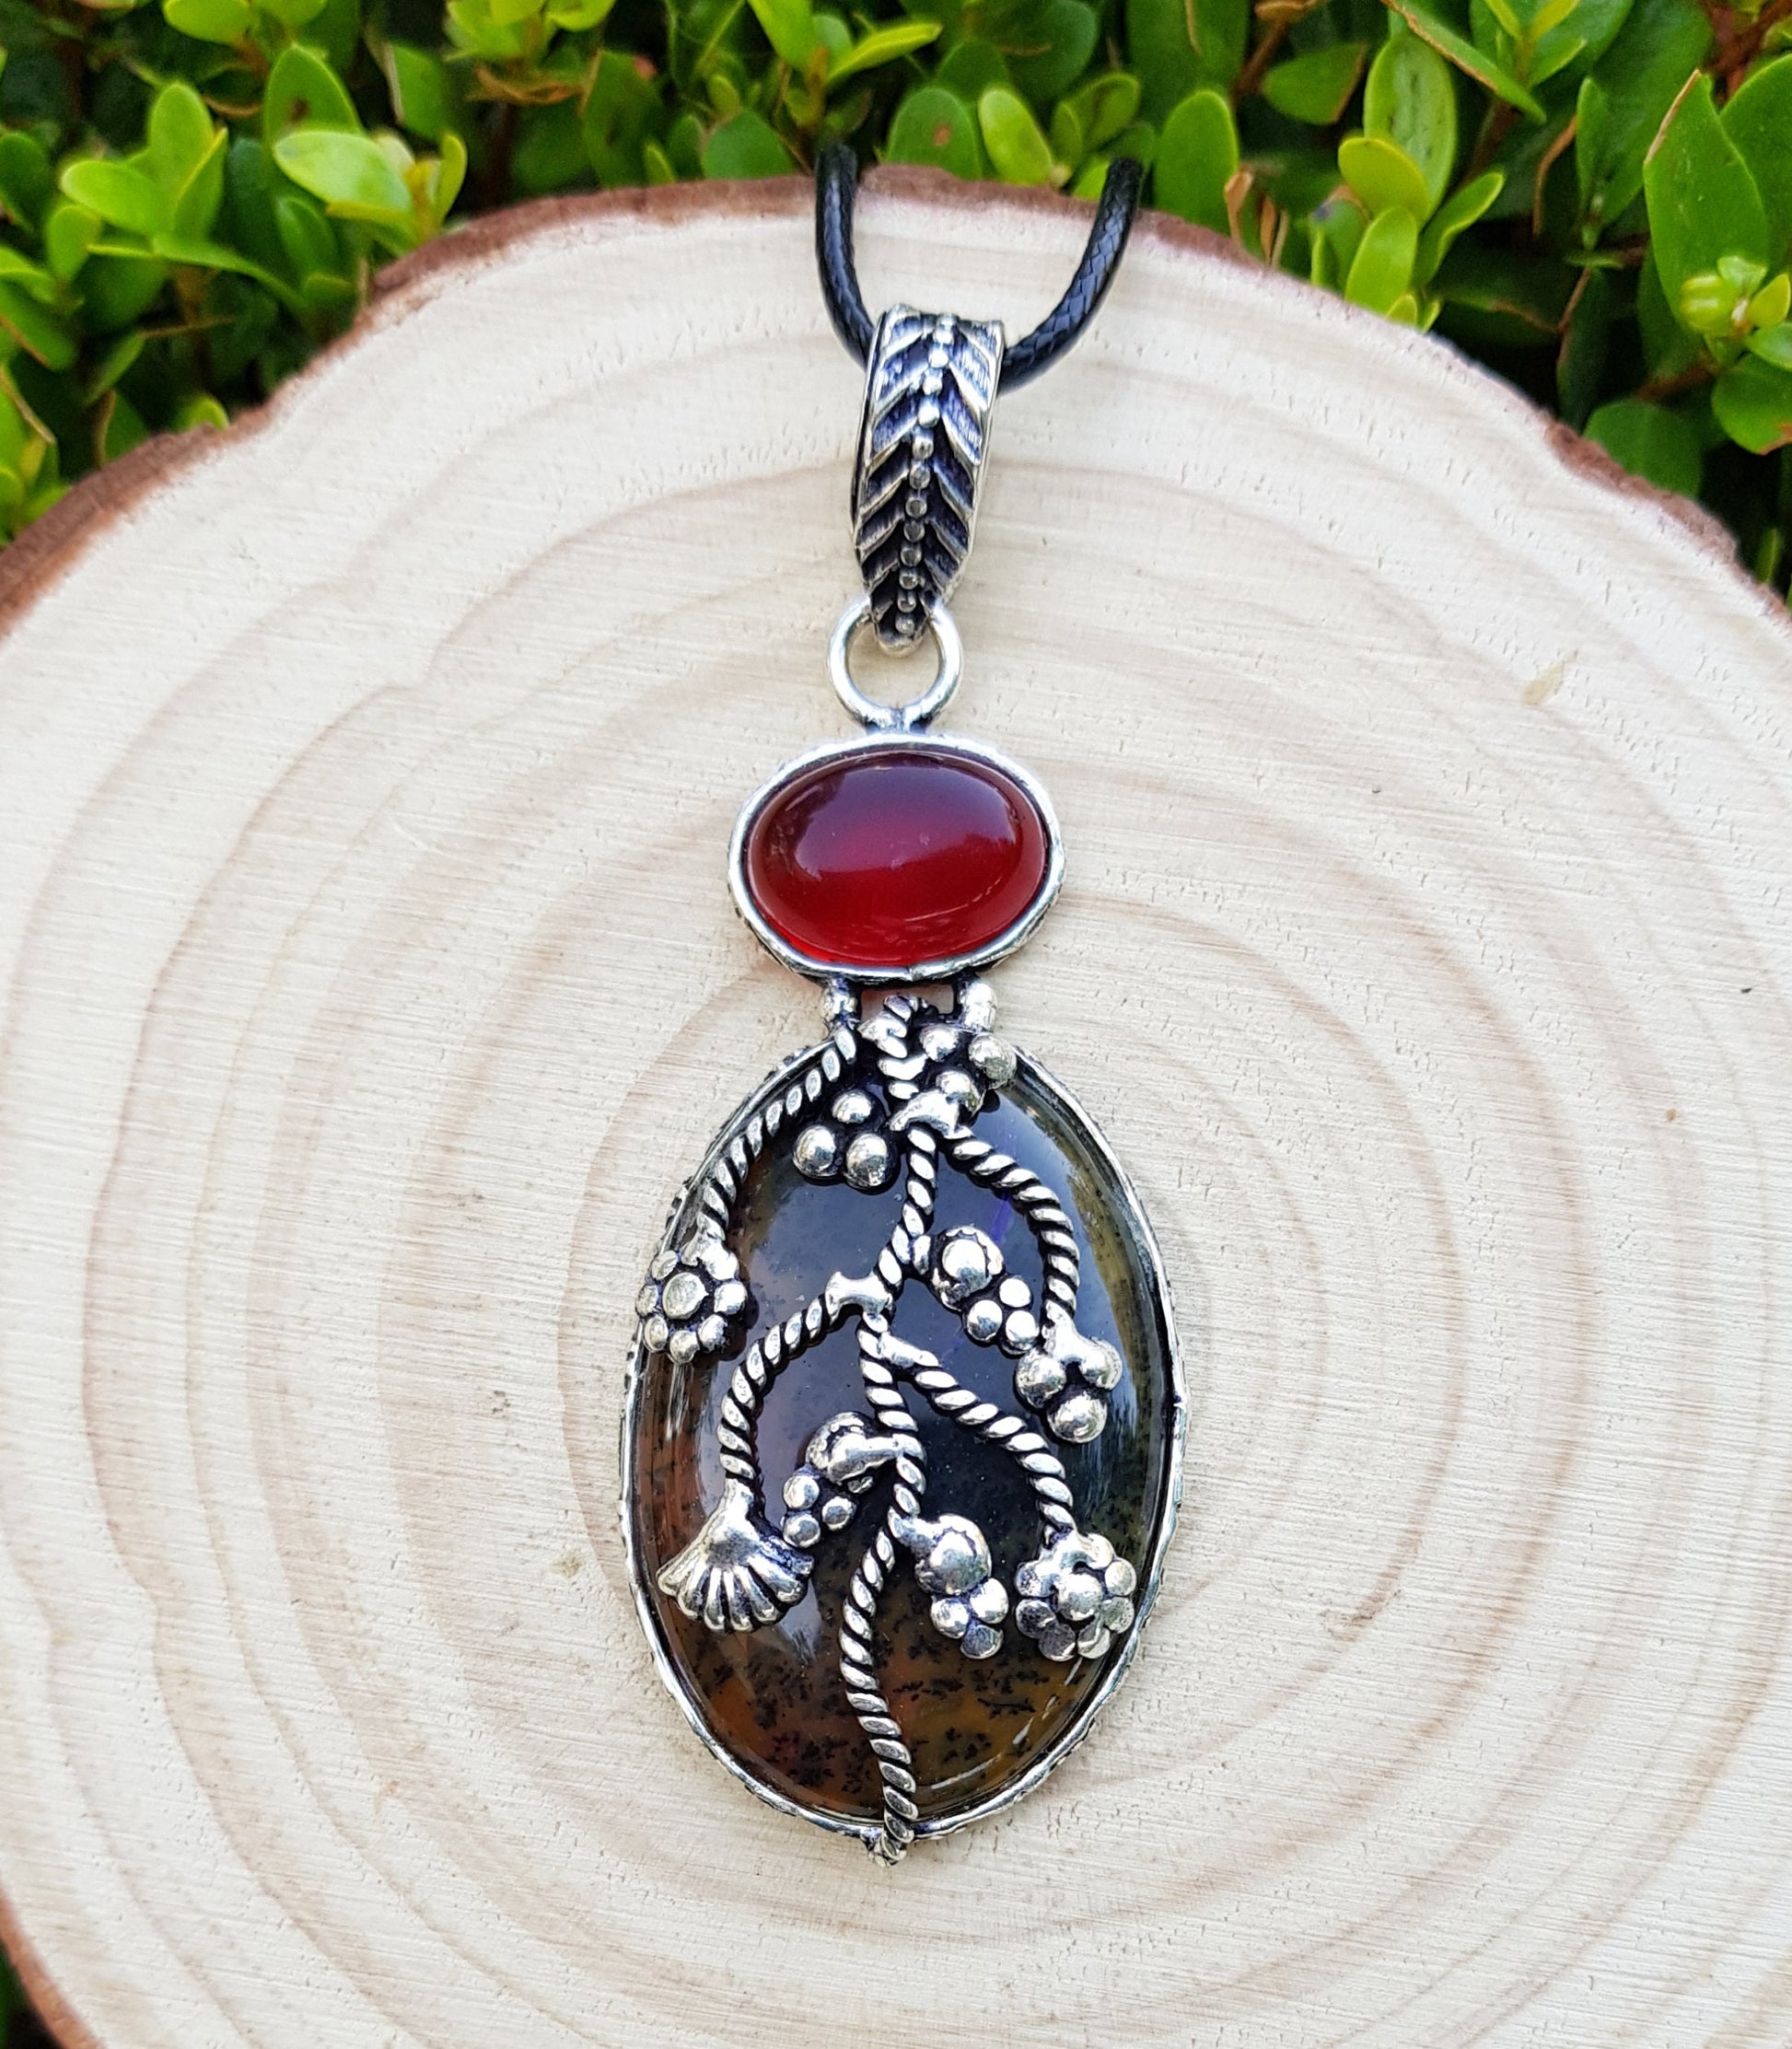 Red Carnelian Pendant In Sterling Silver Statement Necklace Boho Gemstone Pendant Unique Gift One Of A Kind Jewellery